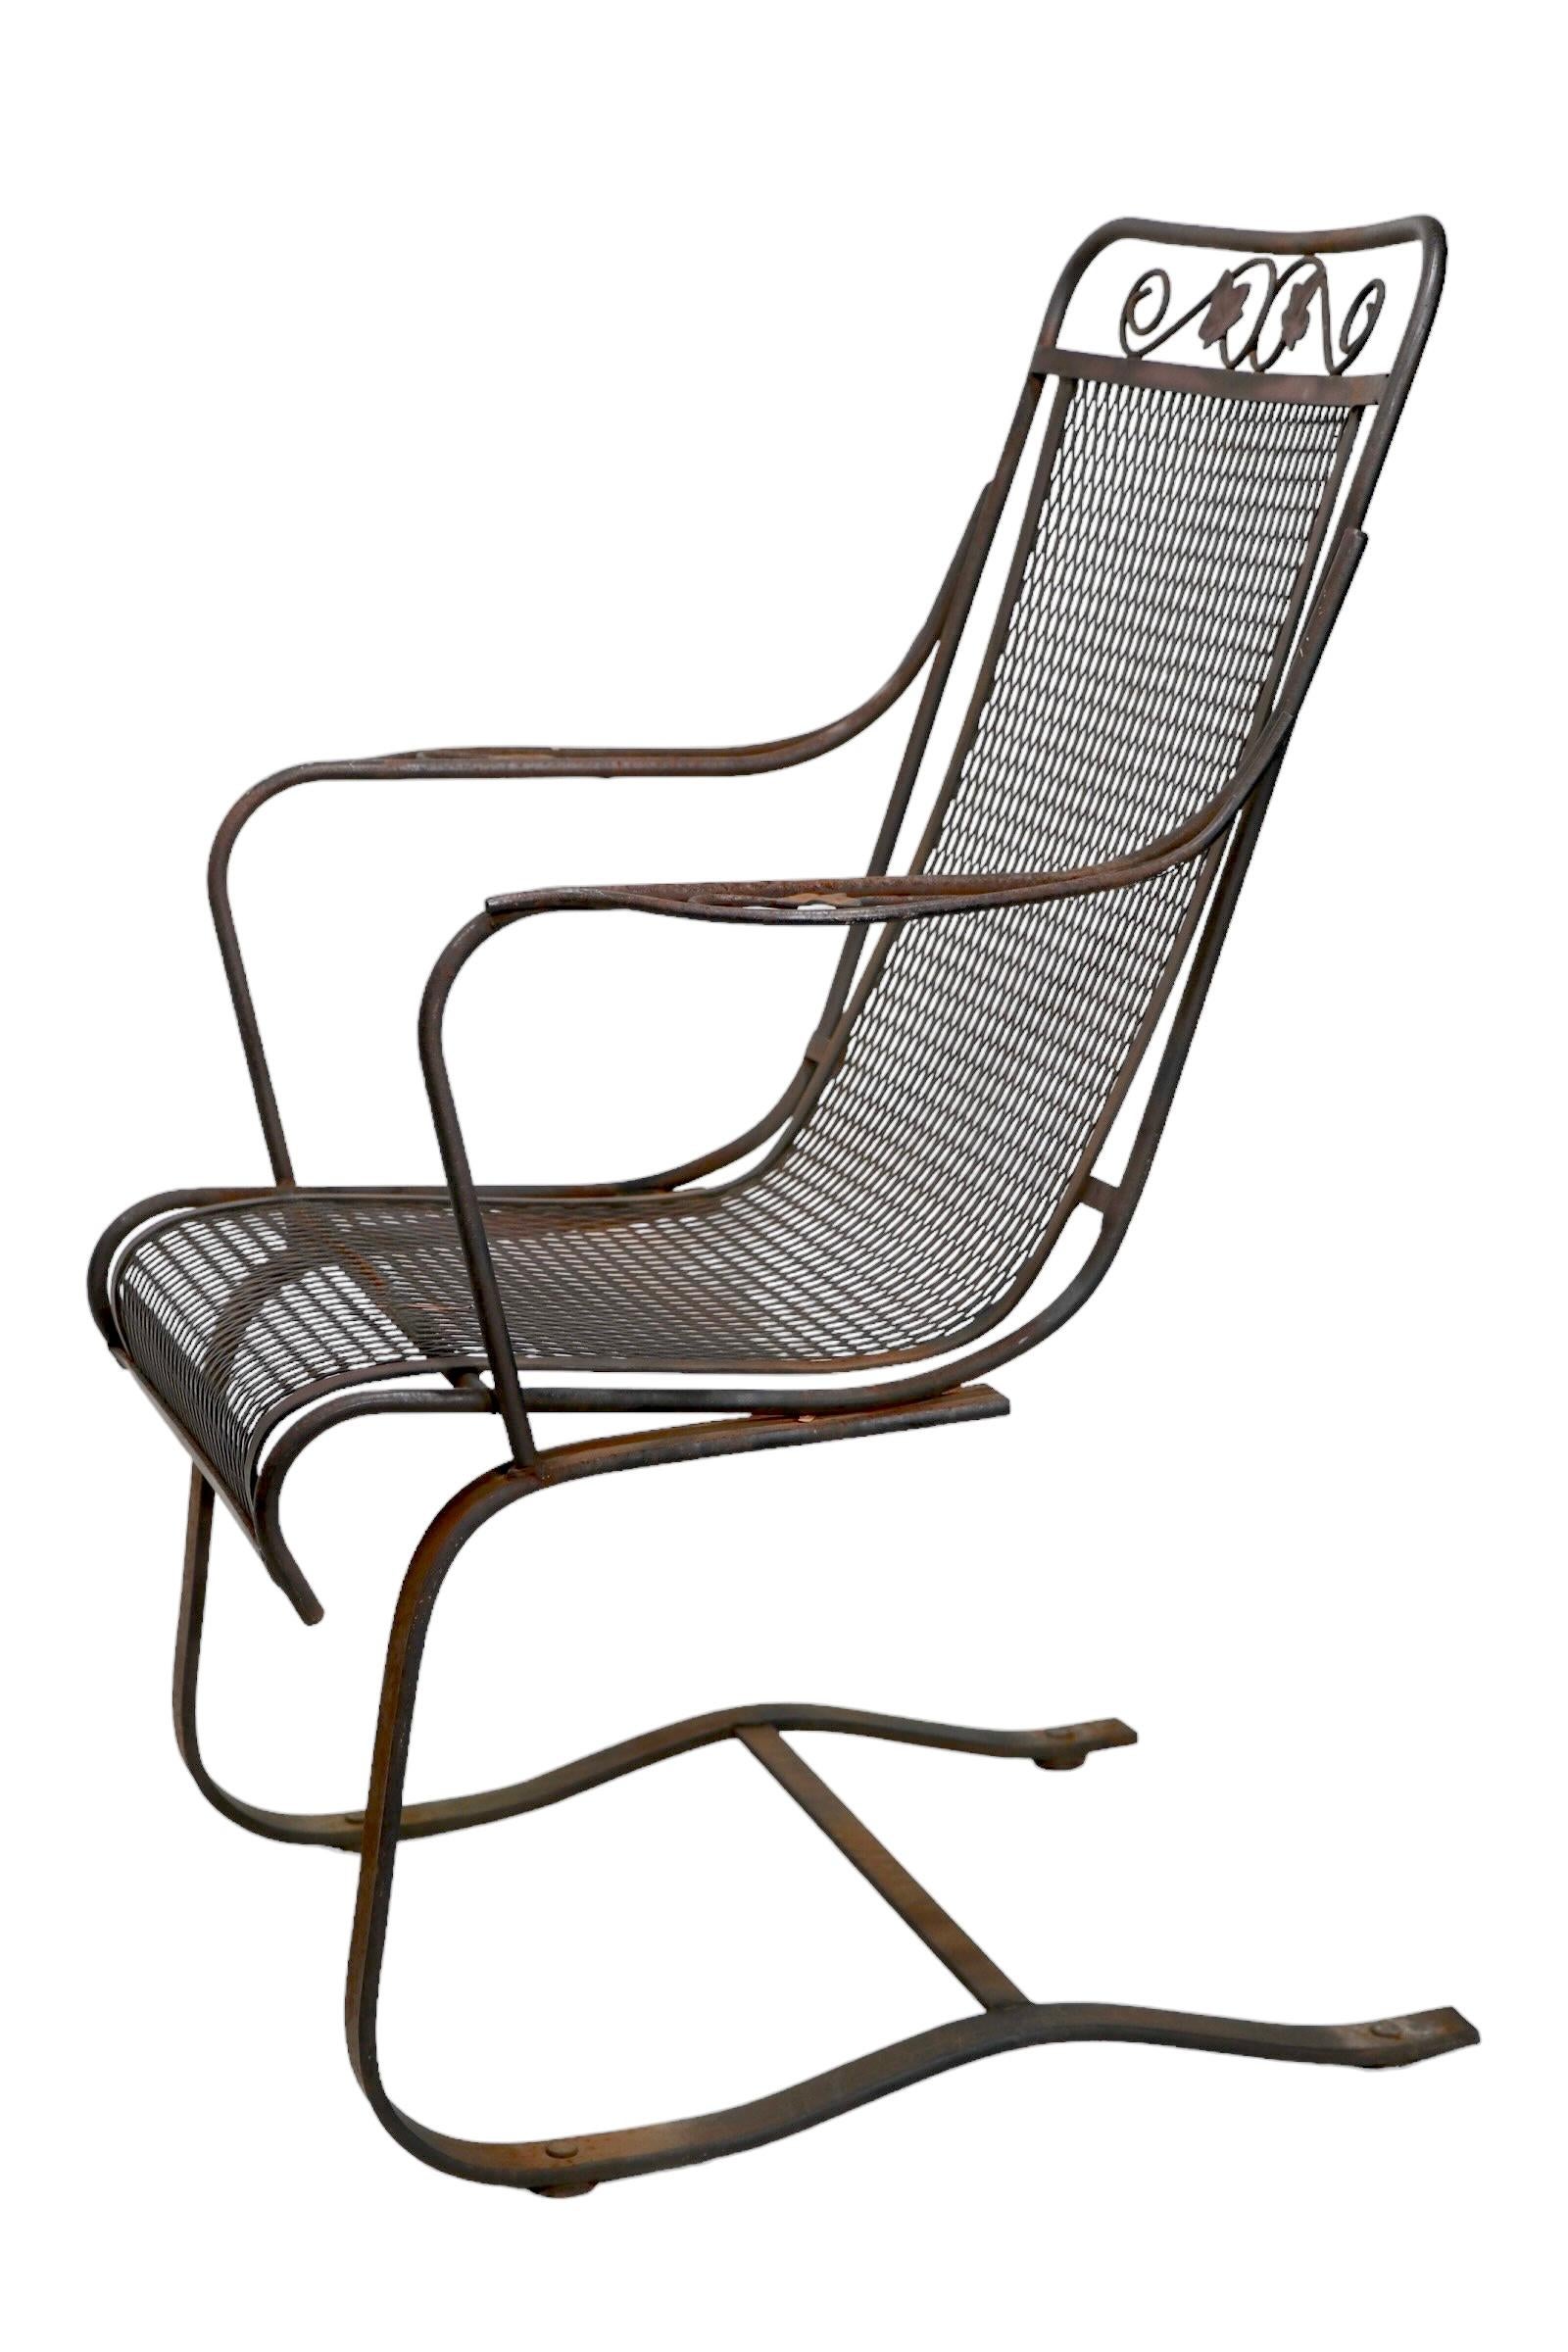 Wrought Iron Cantilevered High Back Lounge Garden Patio Poolside Chair  6